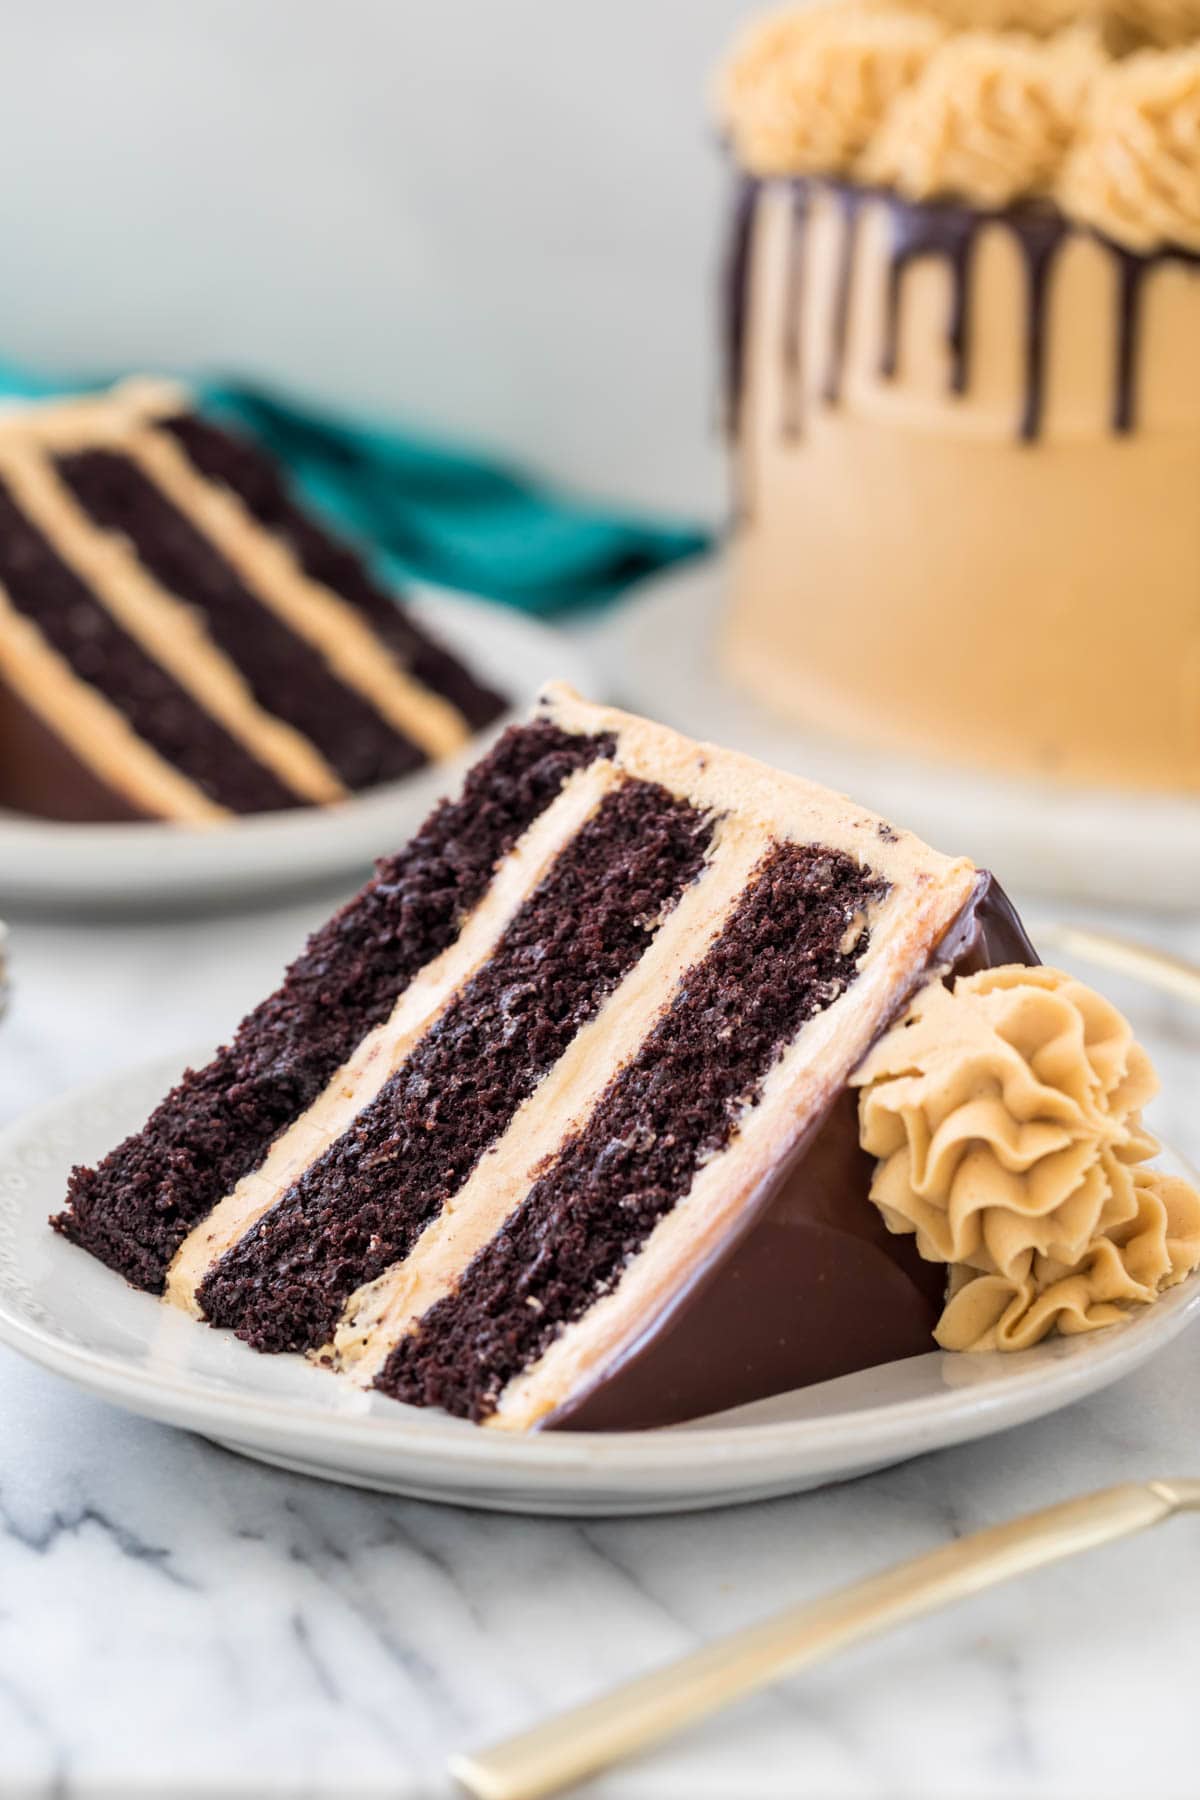 slices of three-layer peanut butter chocolate cake on white plates